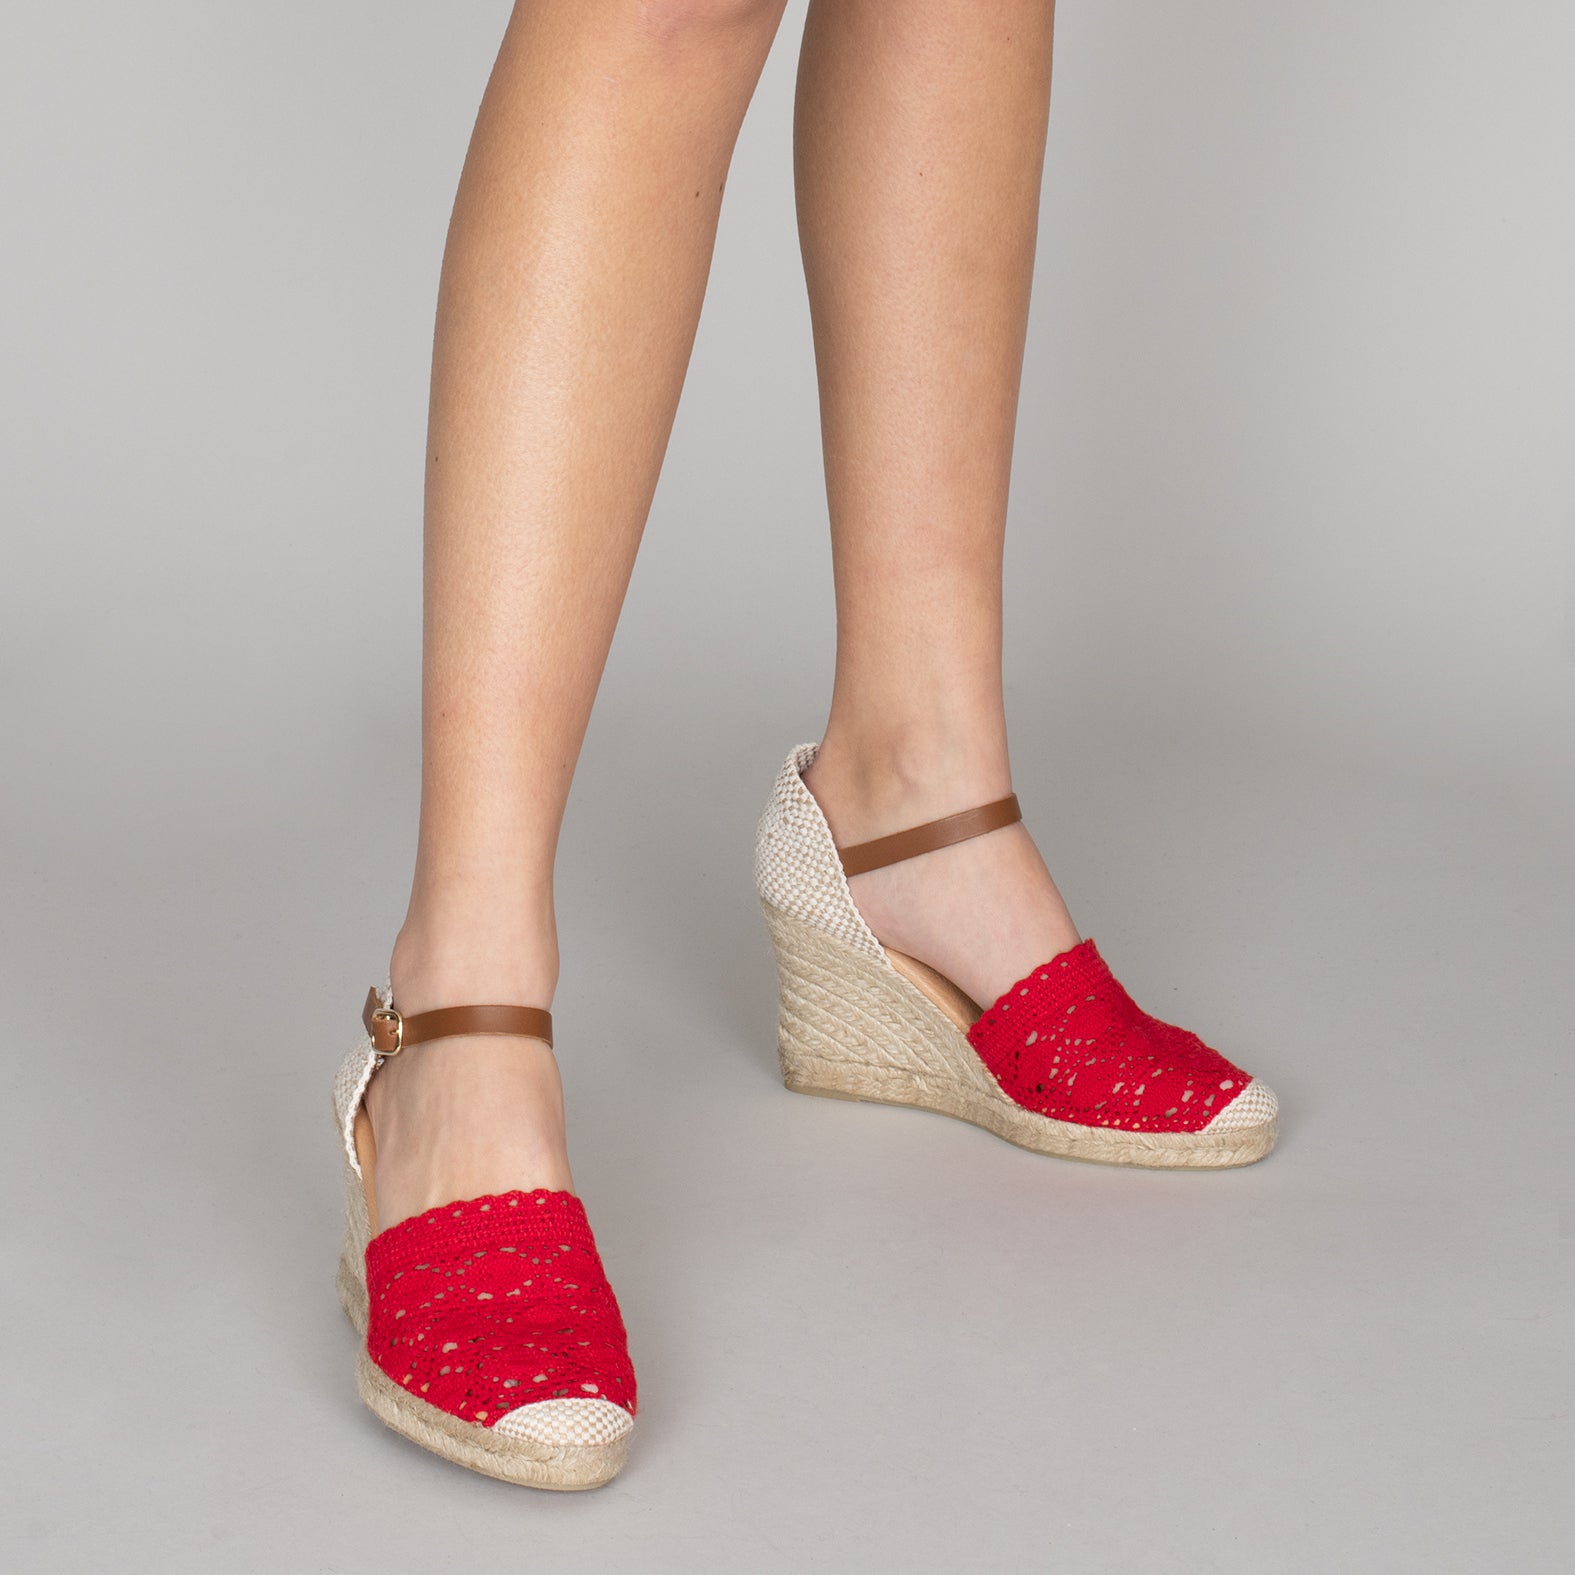 IBIZA – RED crocheted espadrilles